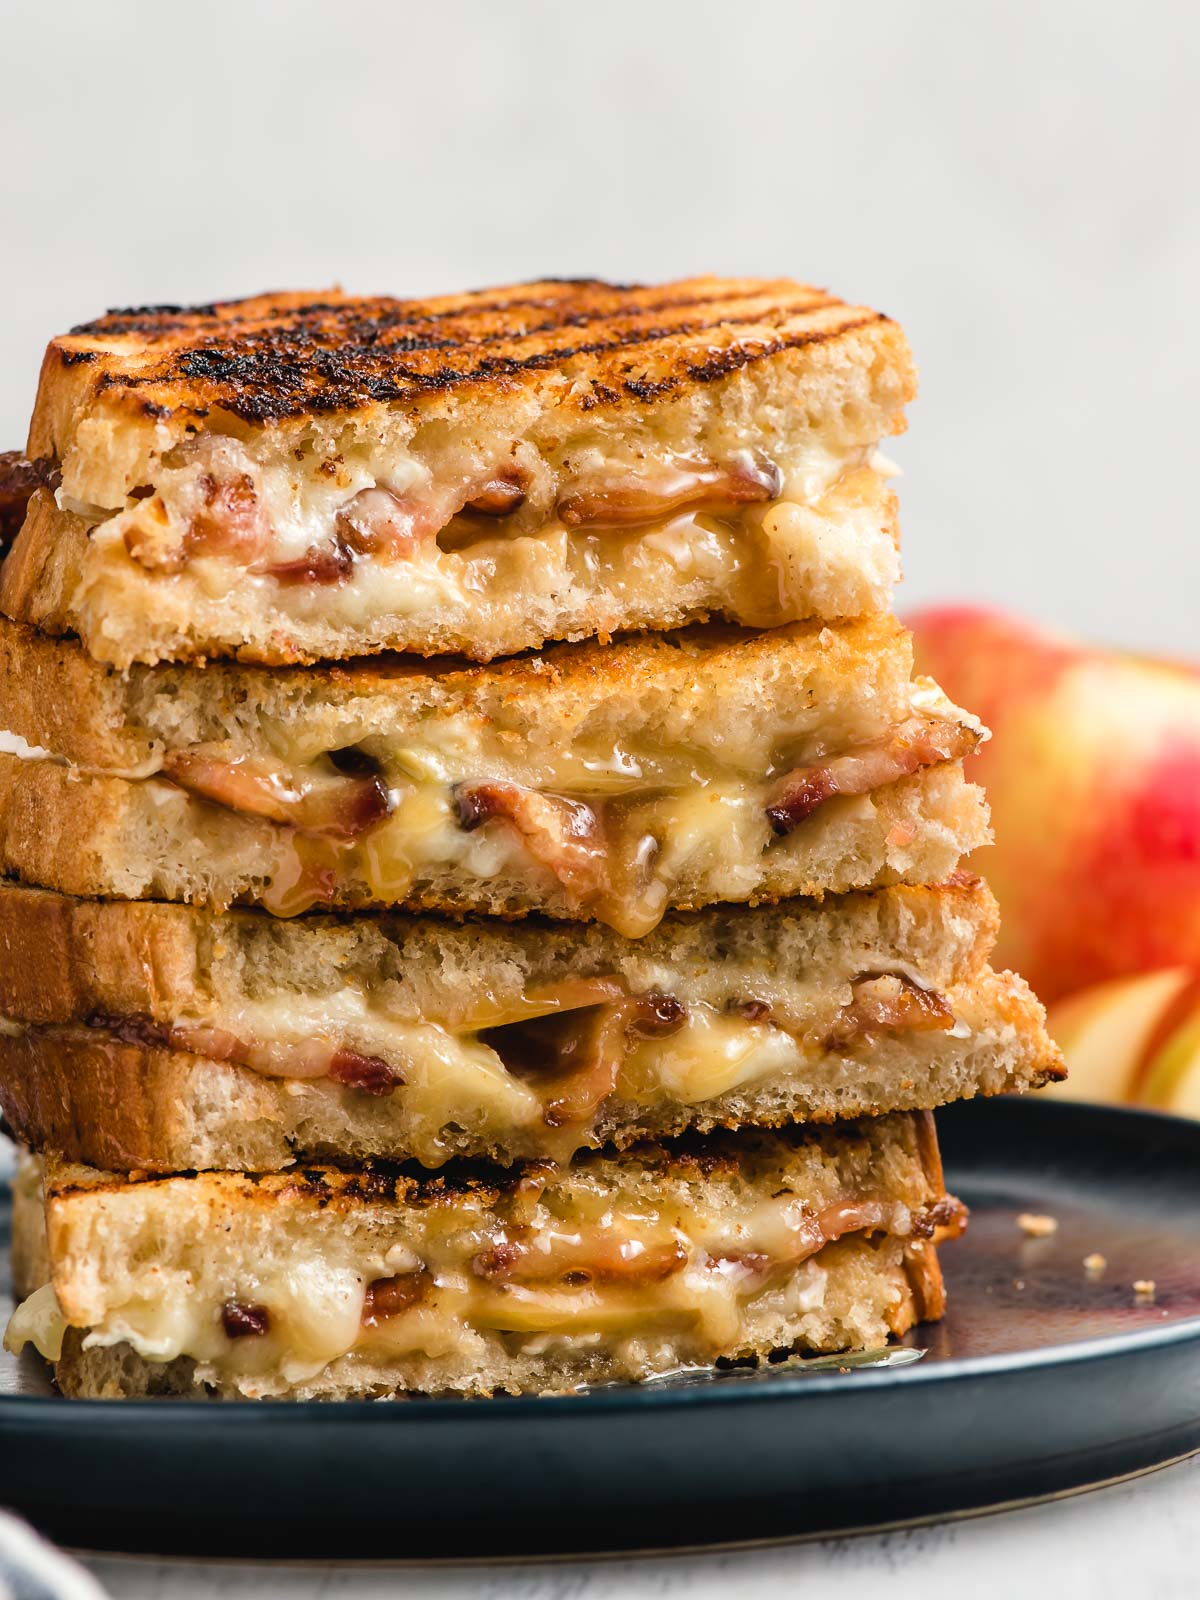 Stack of grilled cheese with brie, bacon, and apple slices.